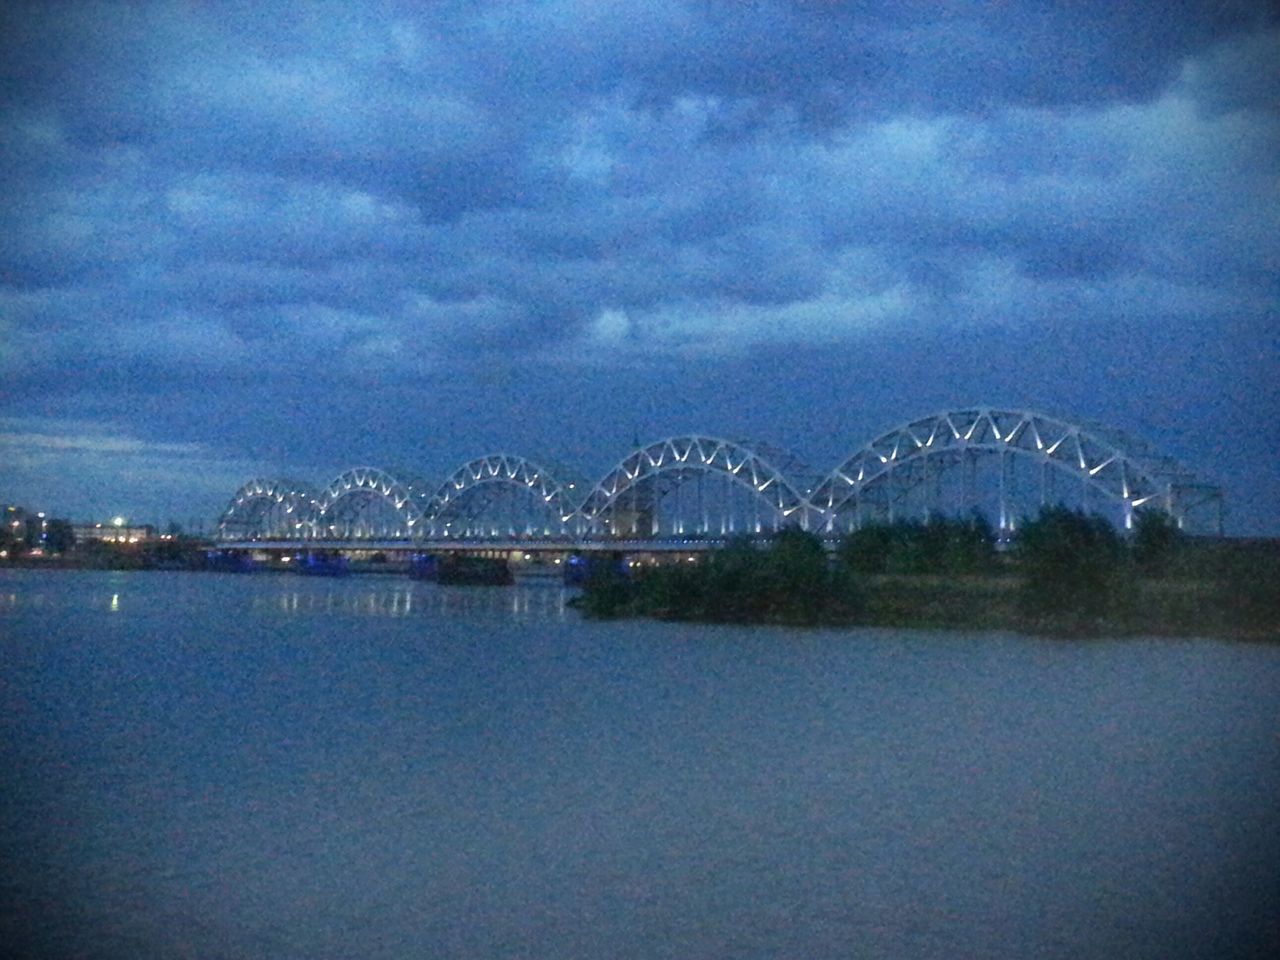 sky, water, illuminated, night, connection, cloud - sky, waterfront, built structure, architecture, bridge - man made structure, river, dusk, reflection, sea, cloudy, scenics, tranquil scene, tranquility, cloud, nature